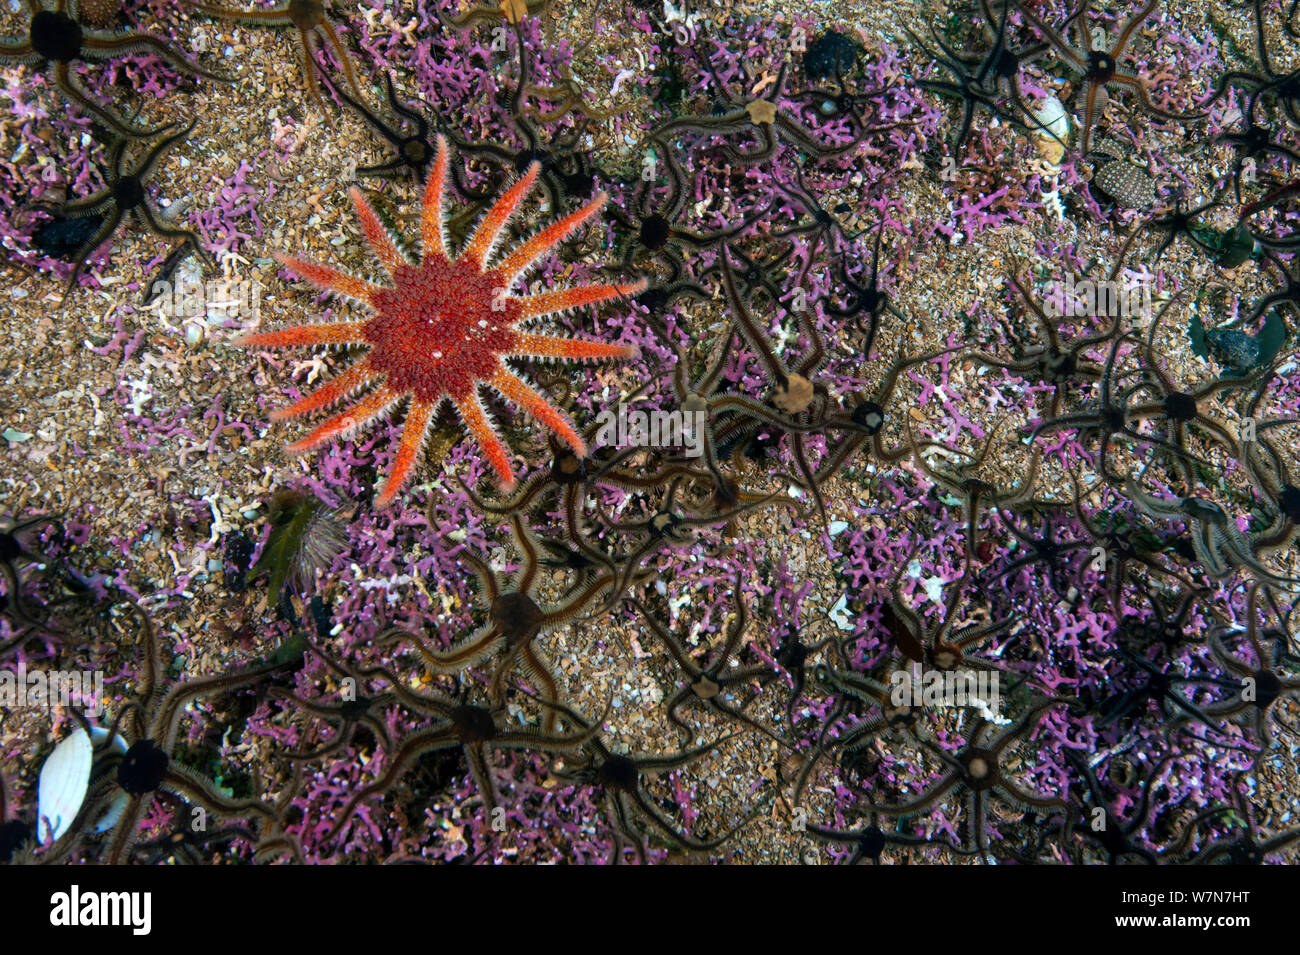 Common sunstar (Crossaster papposus) hunting fleeing Brittlestars (Ophiopetra) on Maerl (Lithothamnion glaciale) encrusted rock, Loch Carron, Ross and Cromarty, Scotland, UK, April. Stock Photo